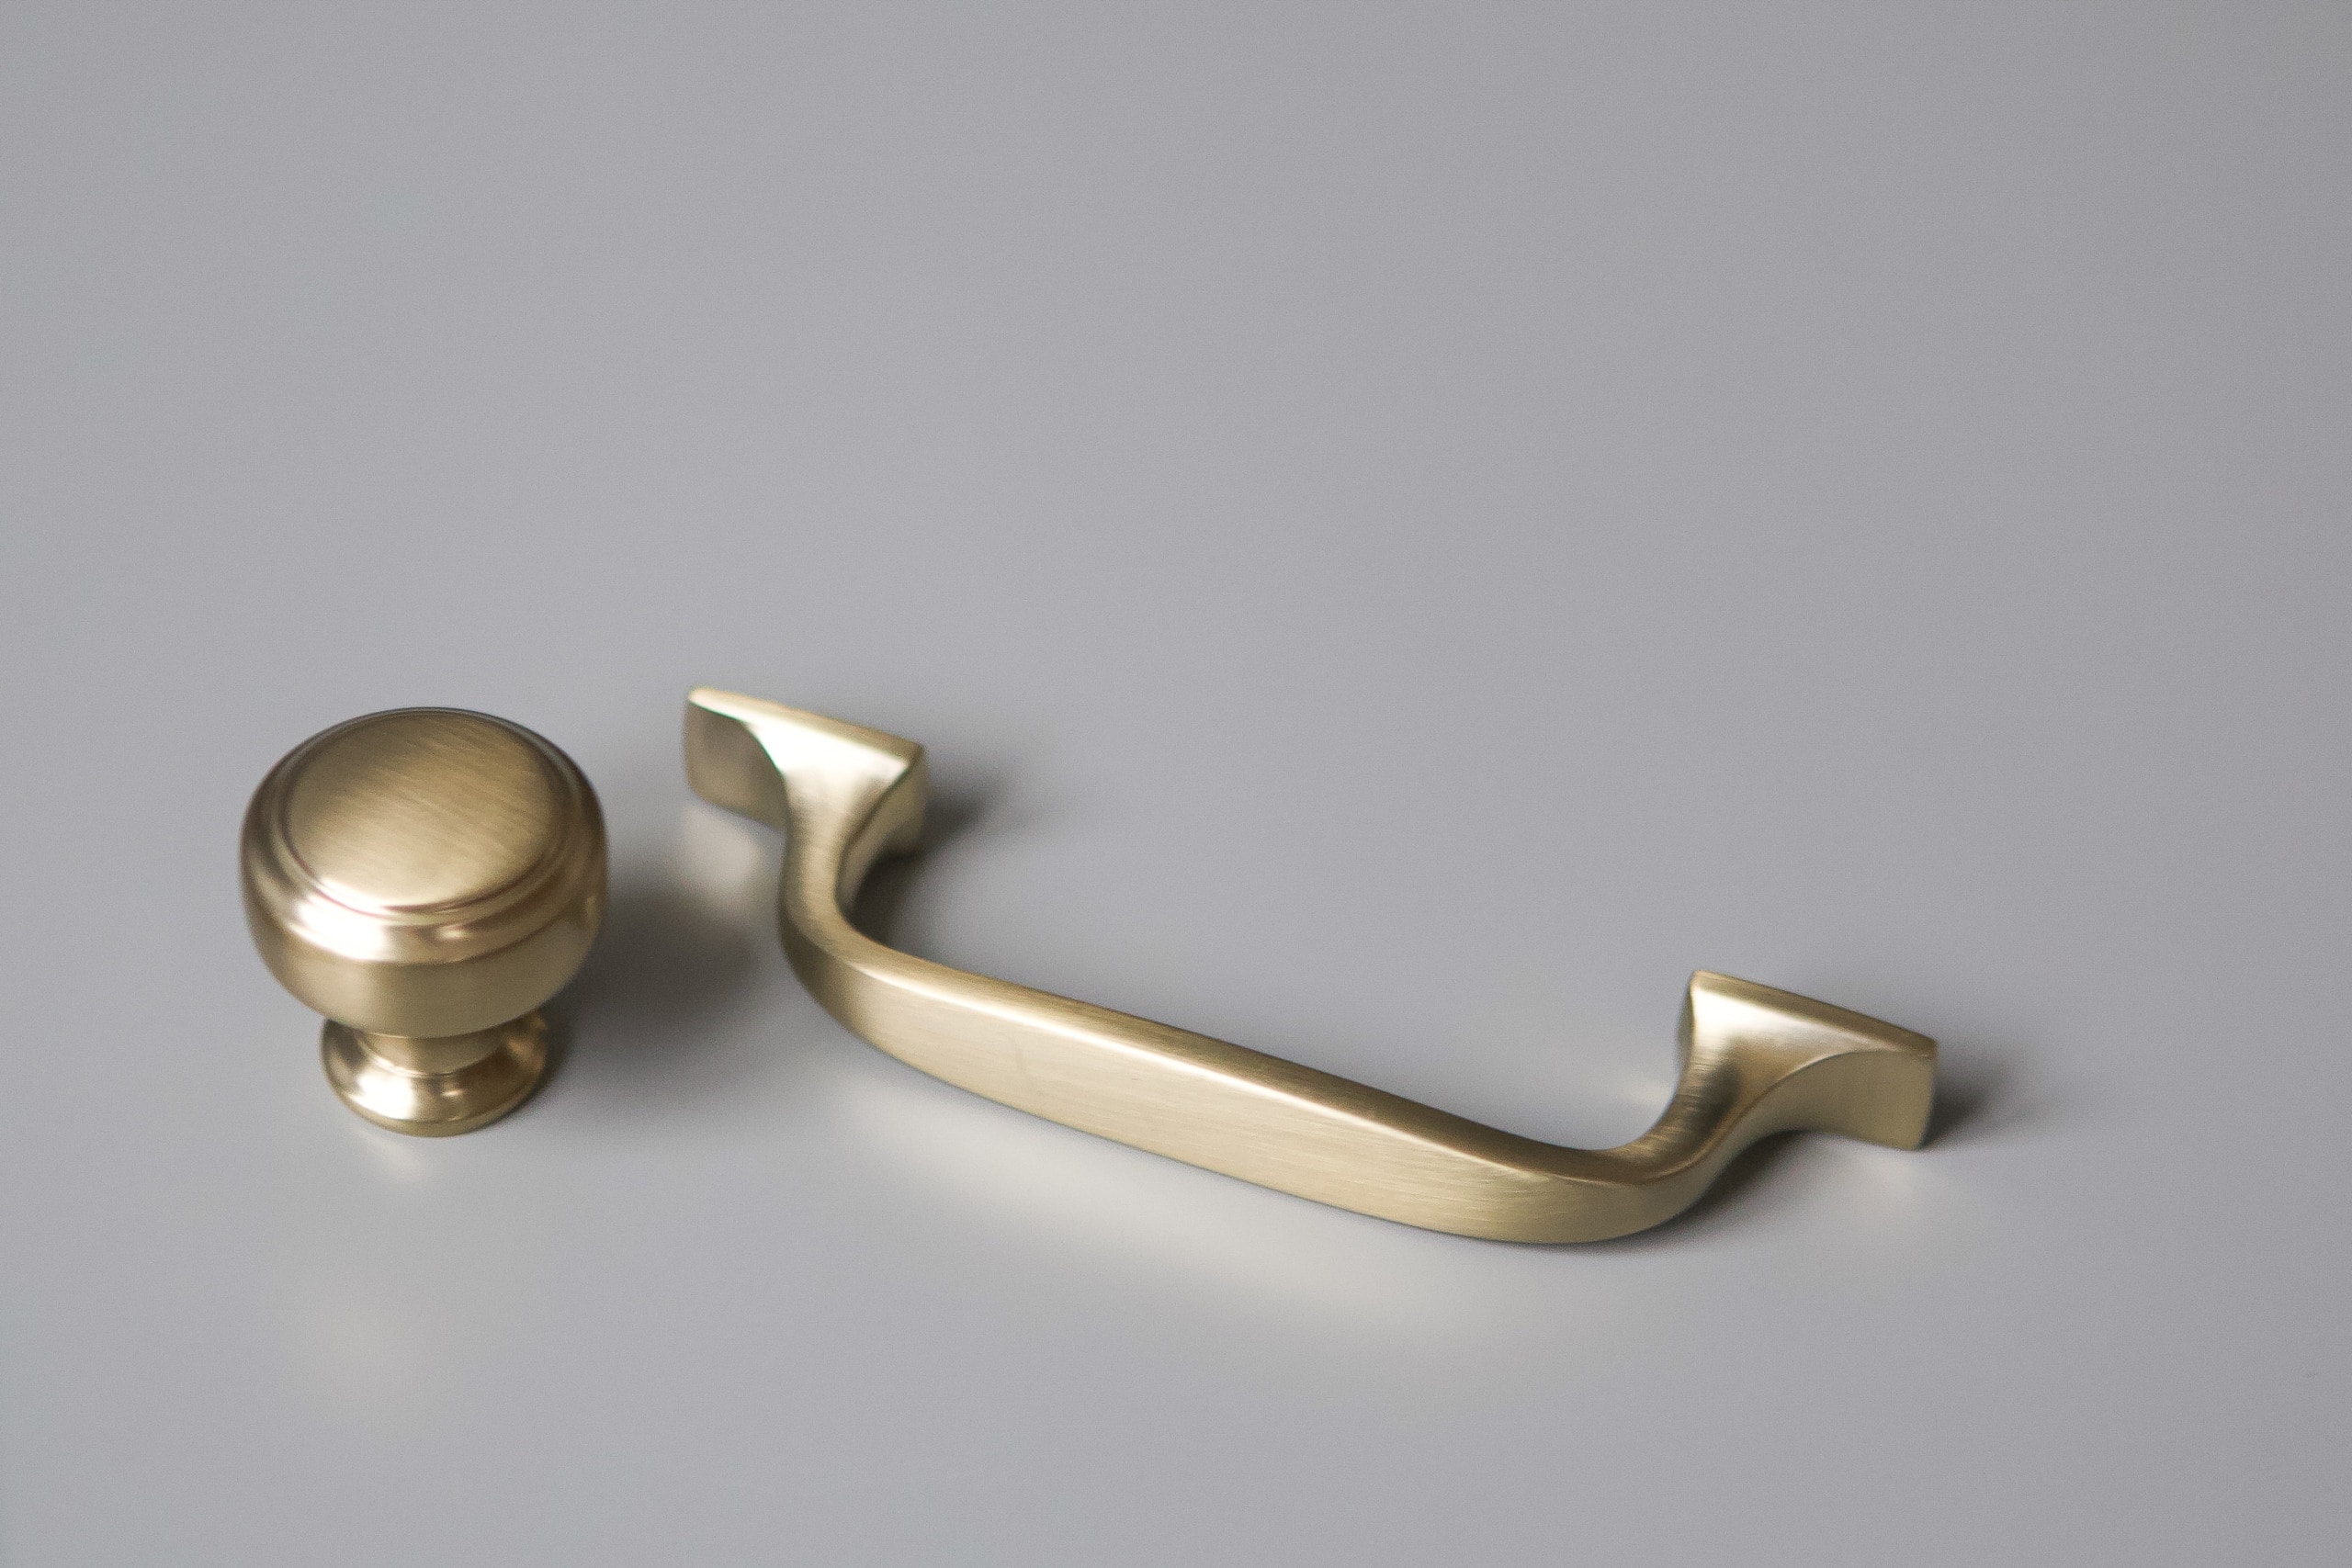 Brass knob and pull for the kitchen